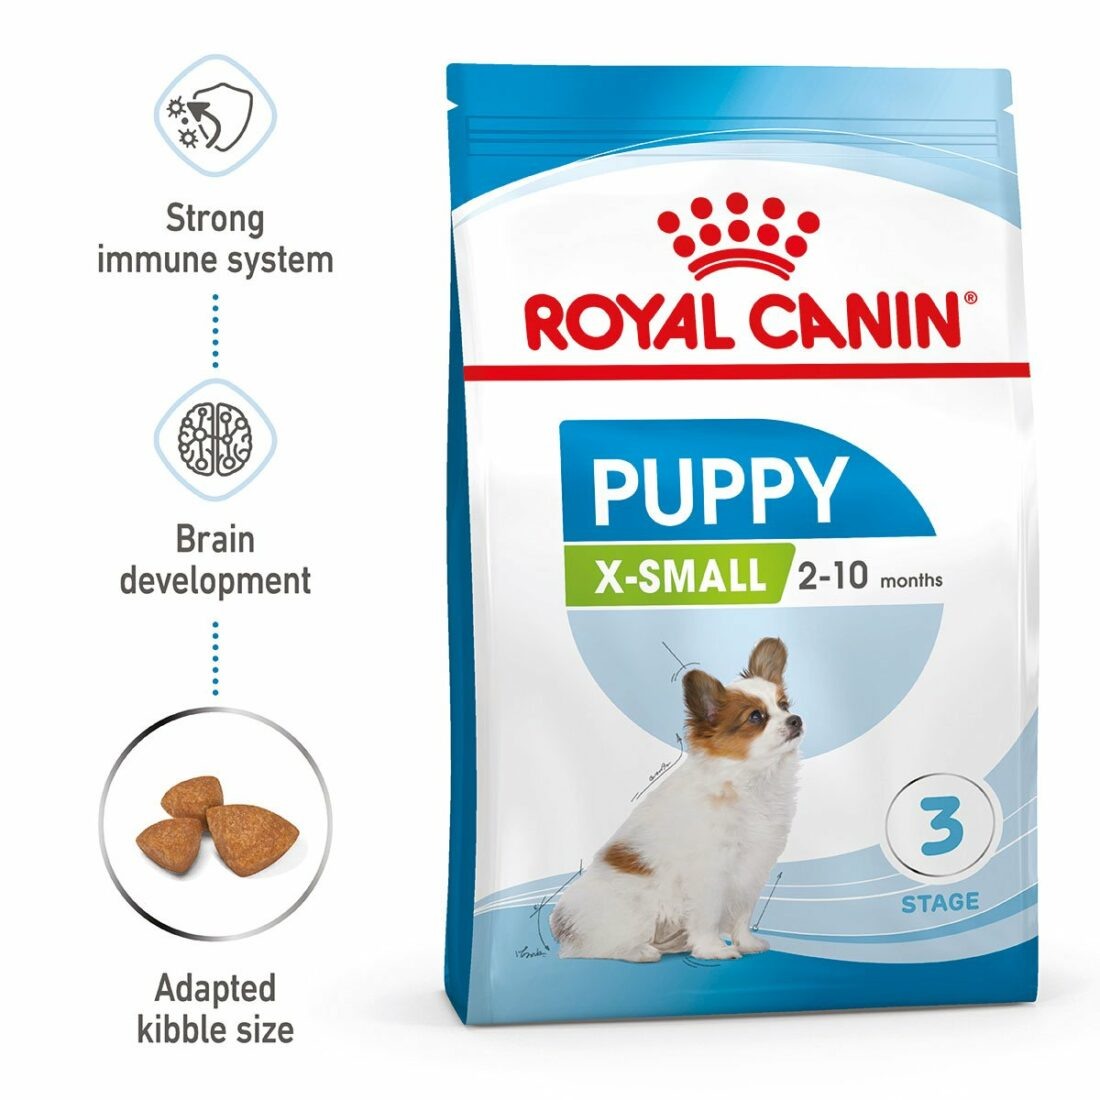 ROYAL CANIN X-SMALL Puppy 2